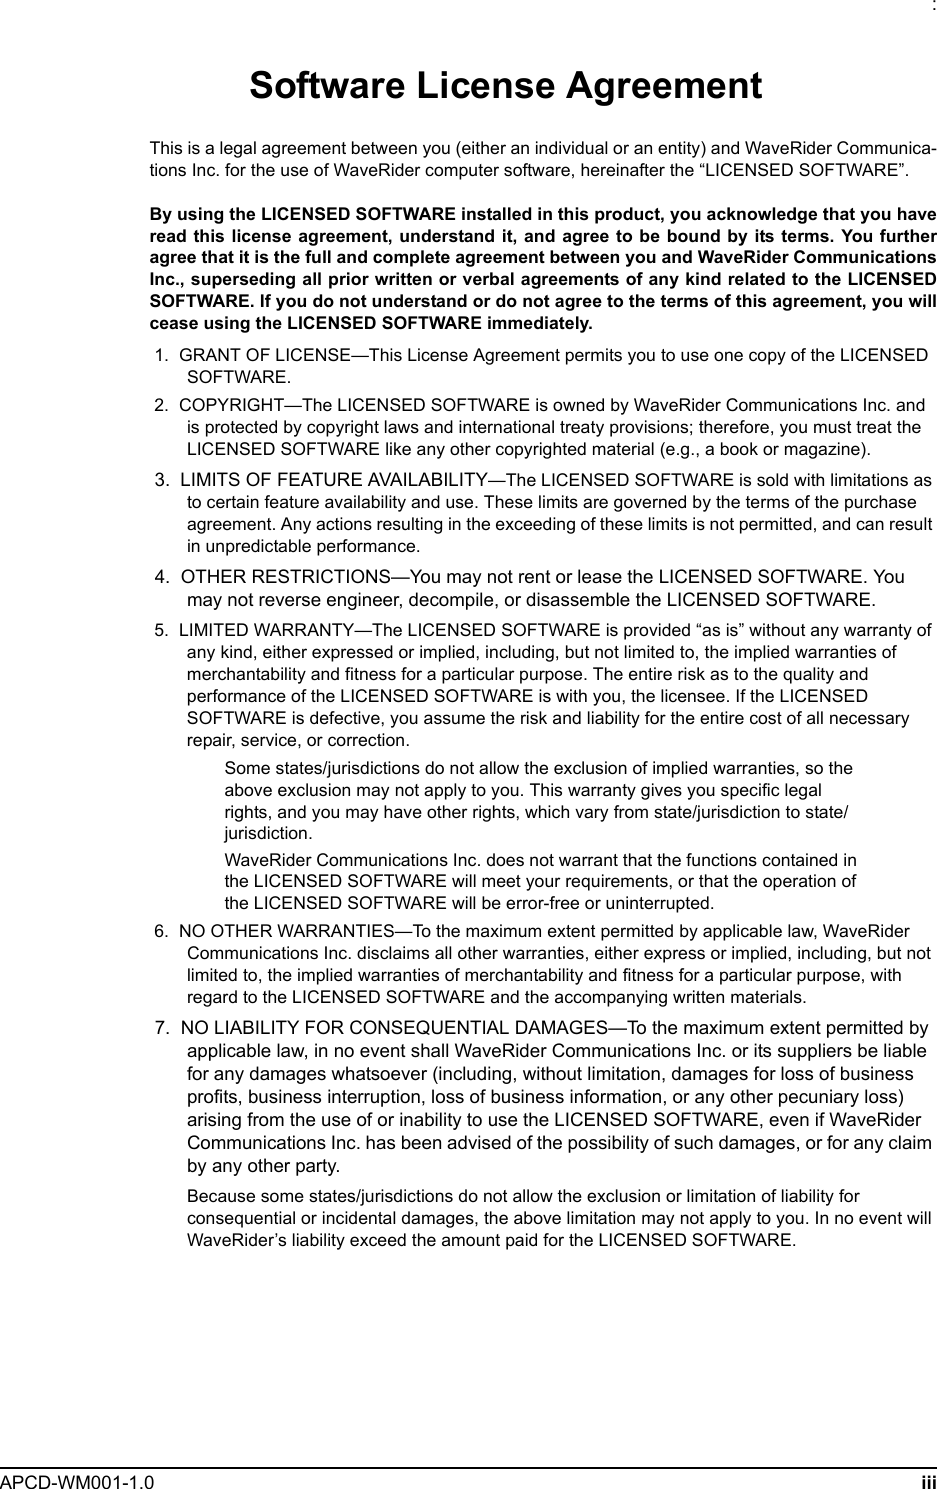 : APCD-WM001-1.0 iiiSoftware License AgreementThis is a legal agreement between you (either an individual or an entity) and WaveRider Communica-tions Inc. for the use of WaveRider computer software, hereinafter the “LICENSED SOFTWARE”.By using the LICENSED SOFTWARE installed in this product, you acknowledge that you haveread this license agreement, understand it, and agree to be bound by its terms. You furtheragree that it is the full and complete agreement between you and WaveRider CommunicationsInc., superseding all prior written or verbal agreements of any kind related to the LICENSEDSOFTWARE. If you do not understand or do not agree to the terms of this agreement, you willcease using the LICENSED SOFTWARE immediately. 1.  GRANT OF LICENSE—This License Agreement permits you to use one copy of the LICENSED SOFTWARE. 2.  COPYRIGHT—The LICENSED SOFTWARE is owned by WaveRider Communications Inc. and is protected by copyright laws and international treaty provisions; therefore, you must treat the LICENSED SOFTWARE like any other copyrighted material (e.g., a book or magazine).  3.  LIMITS OF FEATURE AVAILABILITY—The LICENSED SOFTWARE is sold with limitations as to certain feature availability and use. These limits are governed by the terms of the purchase agreement. Any actions resulting in the exceeding of these limits is not permitted, and can result in unpredictable performance. 4.  OTHER RESTRICTIONS—You may not rent or lease the LICENSED SOFTWARE. You may not reverse engineer, decompile, or disassemble the LICENSED SOFTWARE. 5.  LIMITED WARRANTY—The LICENSED SOFTWARE is provided “as is” without any warranty of any kind, either expressed or implied, including, but not limited to, the implied warranties of merchantability and fitness for a particular purpose. The entire risk as to the quality and performance of the LICENSED SOFTWARE is with you, the licensee. If the LICENSED SOFTWARE is defective, you assume the risk and liability for the entire cost of all necessary repair, service, or correction.Some states/jurisdictions do not allow the exclusion of implied warranties, so the above exclusion may not apply to you. This warranty gives you specific legal rights, and you may have other rights, which vary from state/jurisdiction to state/jurisdiction.WaveRider Communications Inc. does not warrant that the functions contained in the LICENSED SOFTWARE will meet your requirements, or that the operation of the LICENSED SOFTWARE will be error-free or uninterrupted. 6.  NO OTHER WARRANTIES—To the maximum extent permitted by applicable law, WaveRider Communications Inc. disclaims all other warranties, either express or implied, including, but not limited to, the implied warranties of merchantability and fitness for a particular purpose, with regard to the LICENSED SOFTWARE and the accompanying written materials. 7.  NO LIABILITY FOR CONSEQUENTIAL DAMAGES—To the maximum extent permitted by applicable law, in no event shall WaveRider Communications Inc. or its suppliers be liable for any damages whatsoever (including, without limitation, damages for loss of business profits, business interruption, loss of business information, or any other pecuniary loss) arising from the use of or inability to use the LICENSED SOFTWARE, even if WaveRider Communications Inc. has been advised of the possibility of such damages, or for any claim by any other party.Because some states/jurisdictions do not allow the exclusion or limitation of liability for consequential or incidental damages, the above limitation may not apply to you. In no event will WaveRider’s liability exceed the amount paid for the LICENSED SOFTWARE.